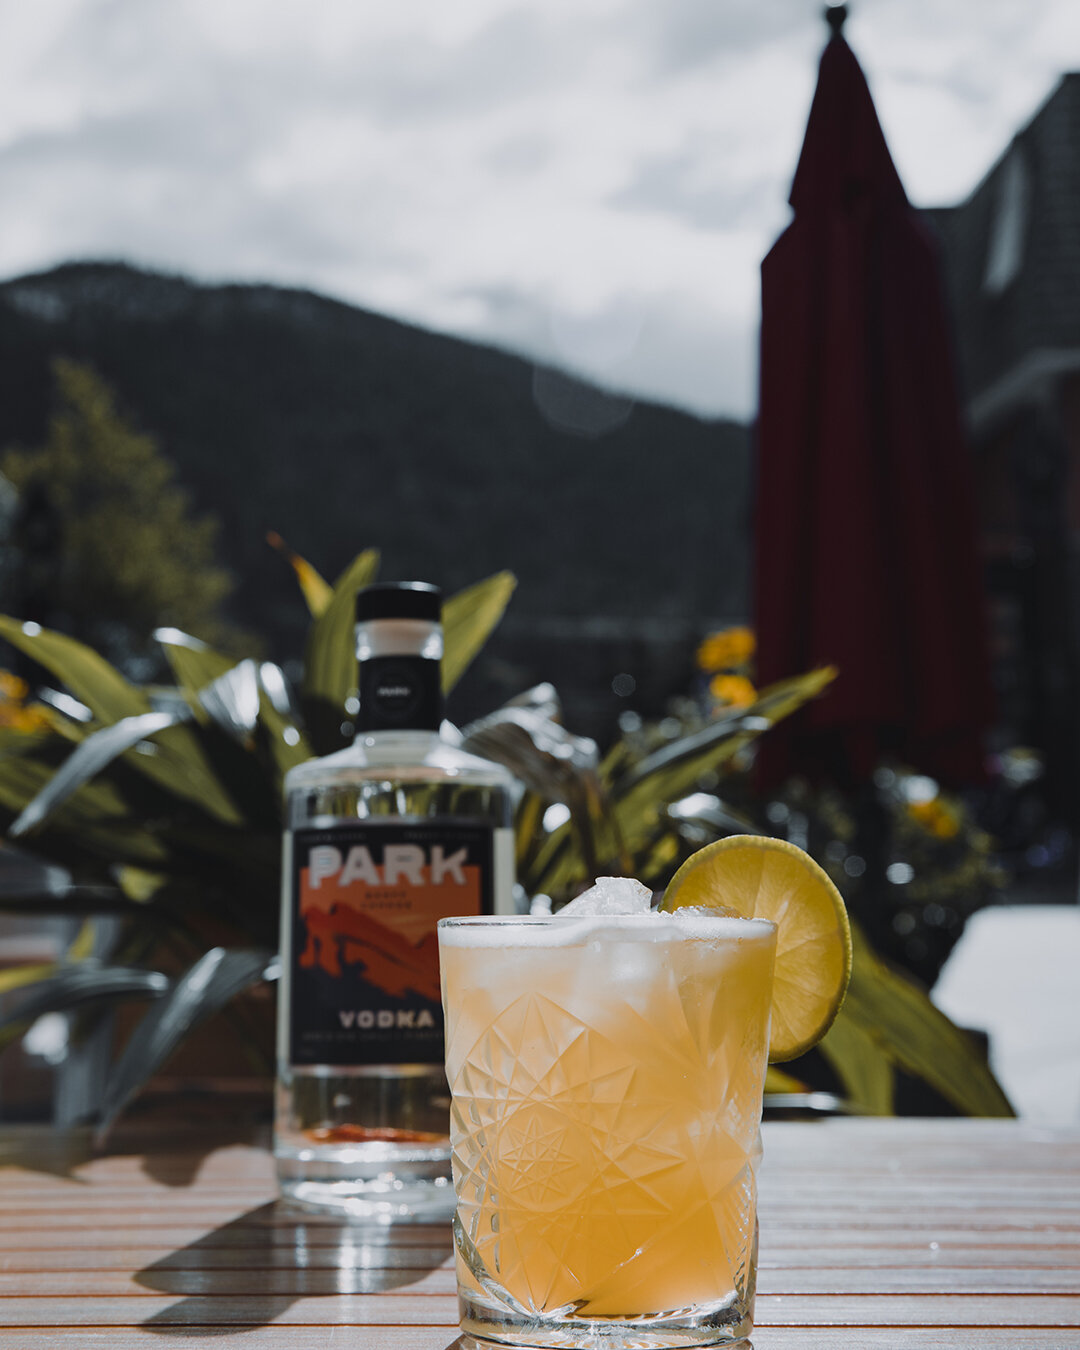 Our streetside patio is now open! Sit amongst the pedestrian-only Caribou street and enjoy one of our cocktails made with local @parkdistillery spirits!